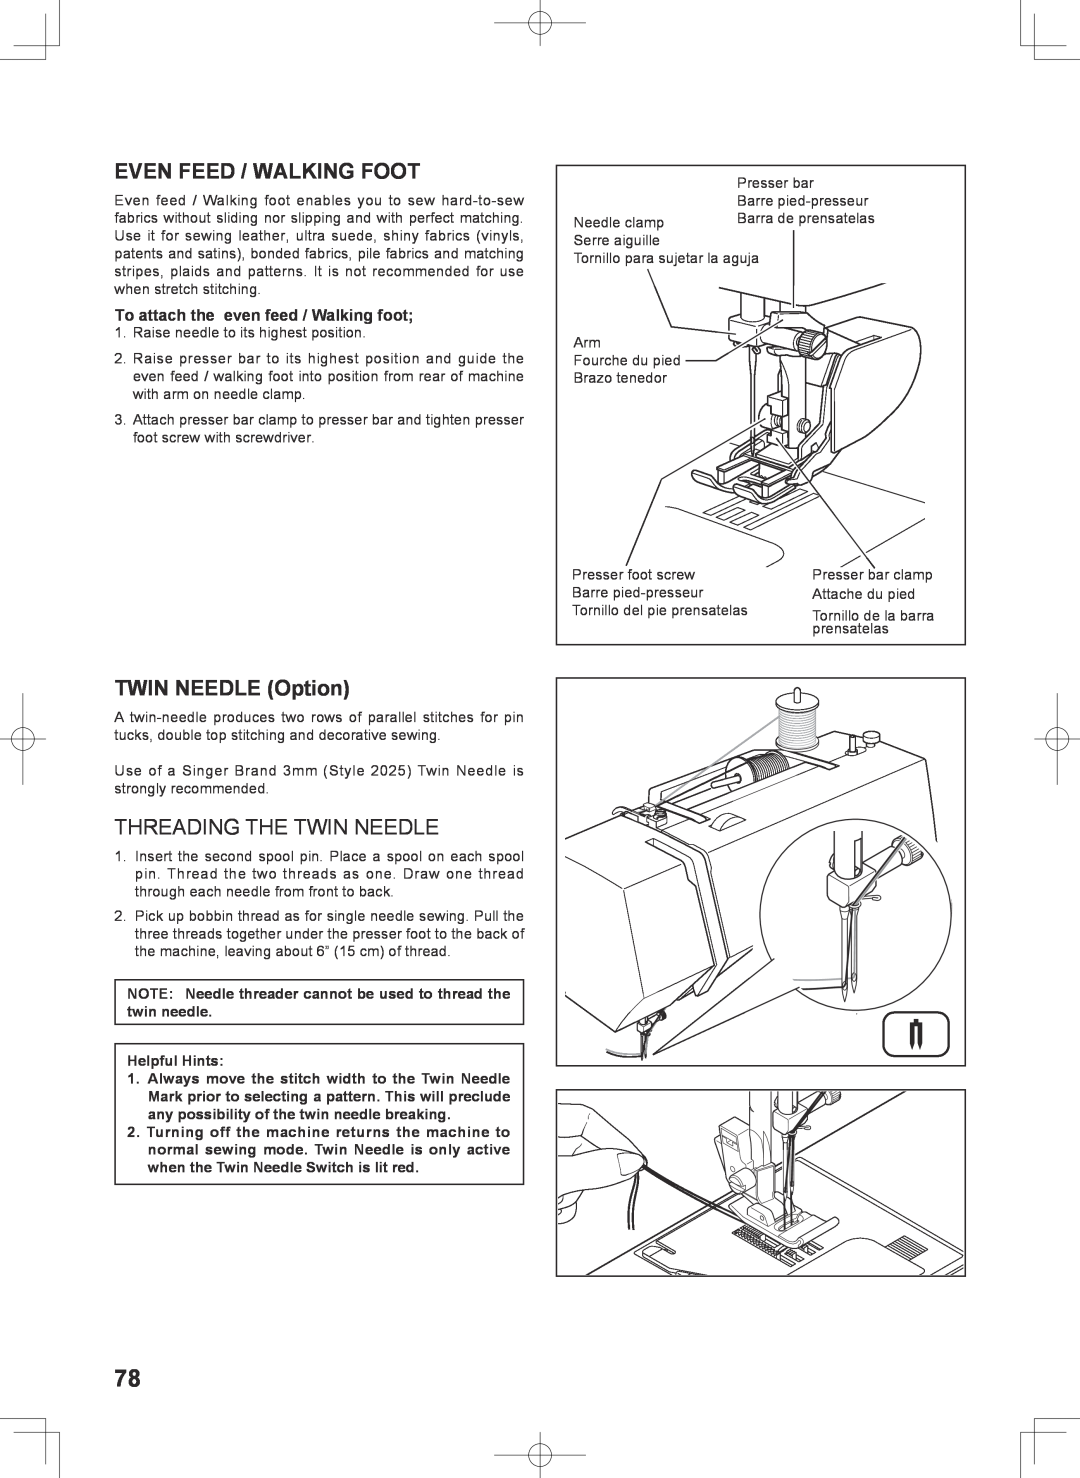 Singer 7467S instruction manual Even Feed / Walking Foot, TWIN NEEDLE Option, Threading The Twin Needle 